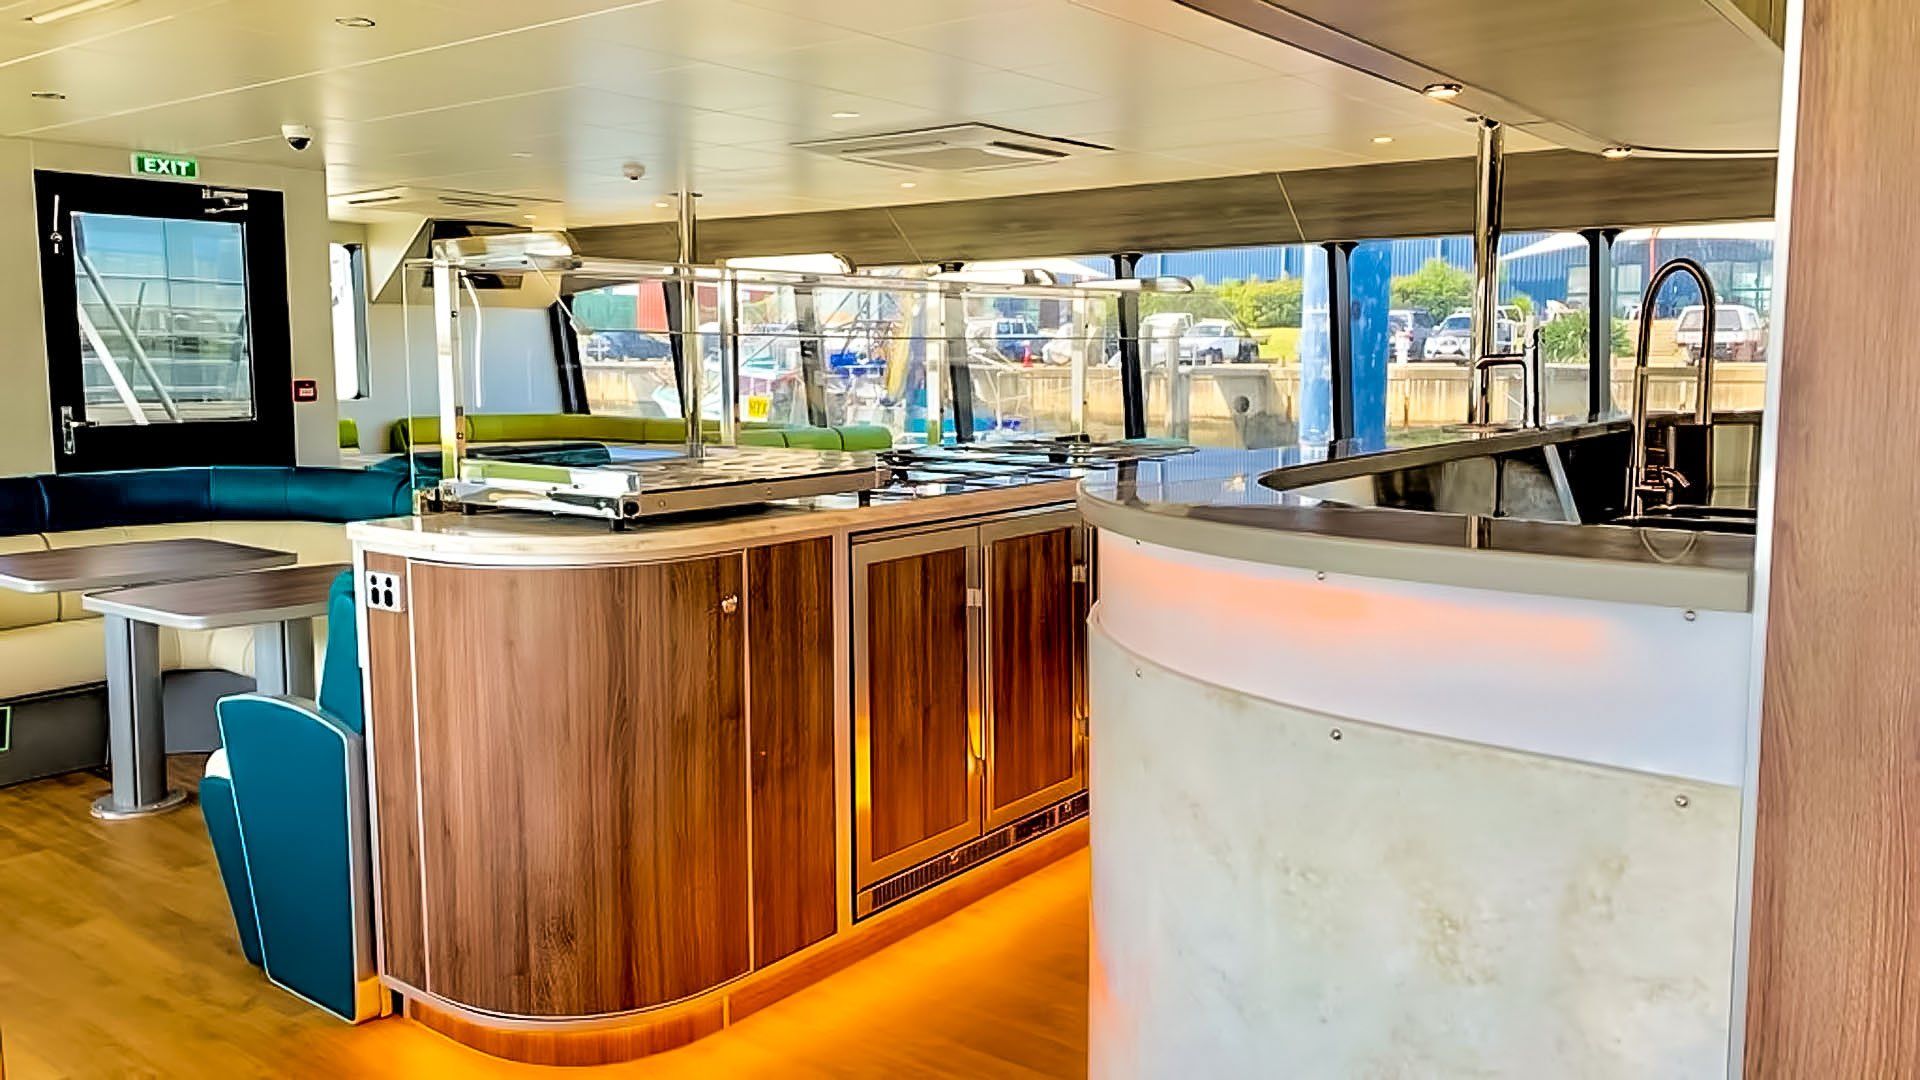 The quality fit out of the Ocean Explorer